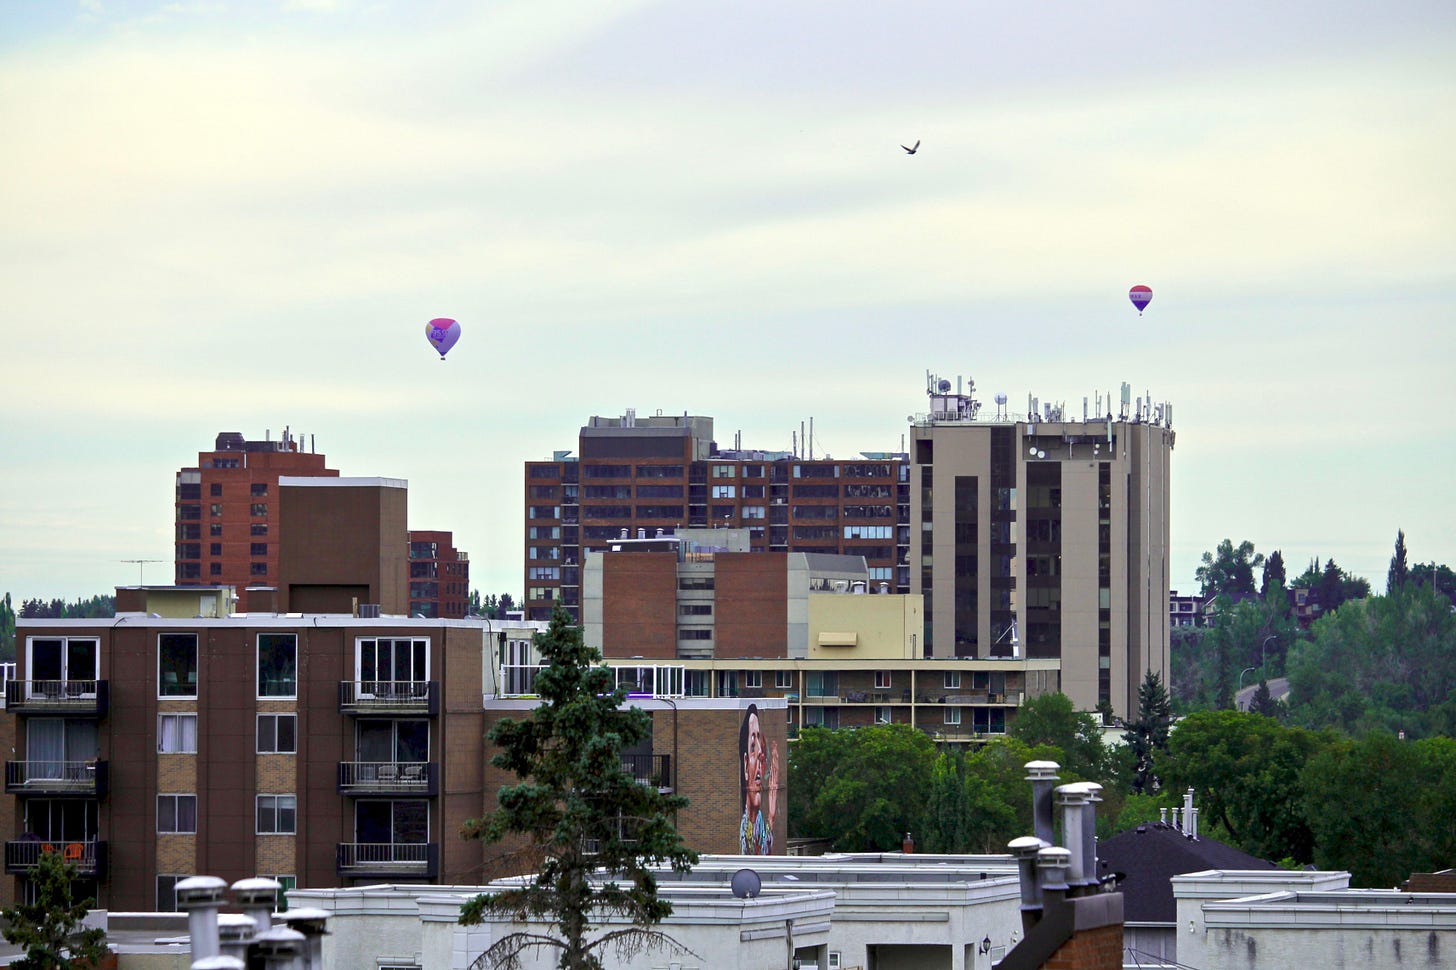 Two hot air balloons in the distance over apartment buildings in Mission with large art mural of man on the side of one building with his hand reaching up to the sky. Also, a bird flying in between the two balloons.